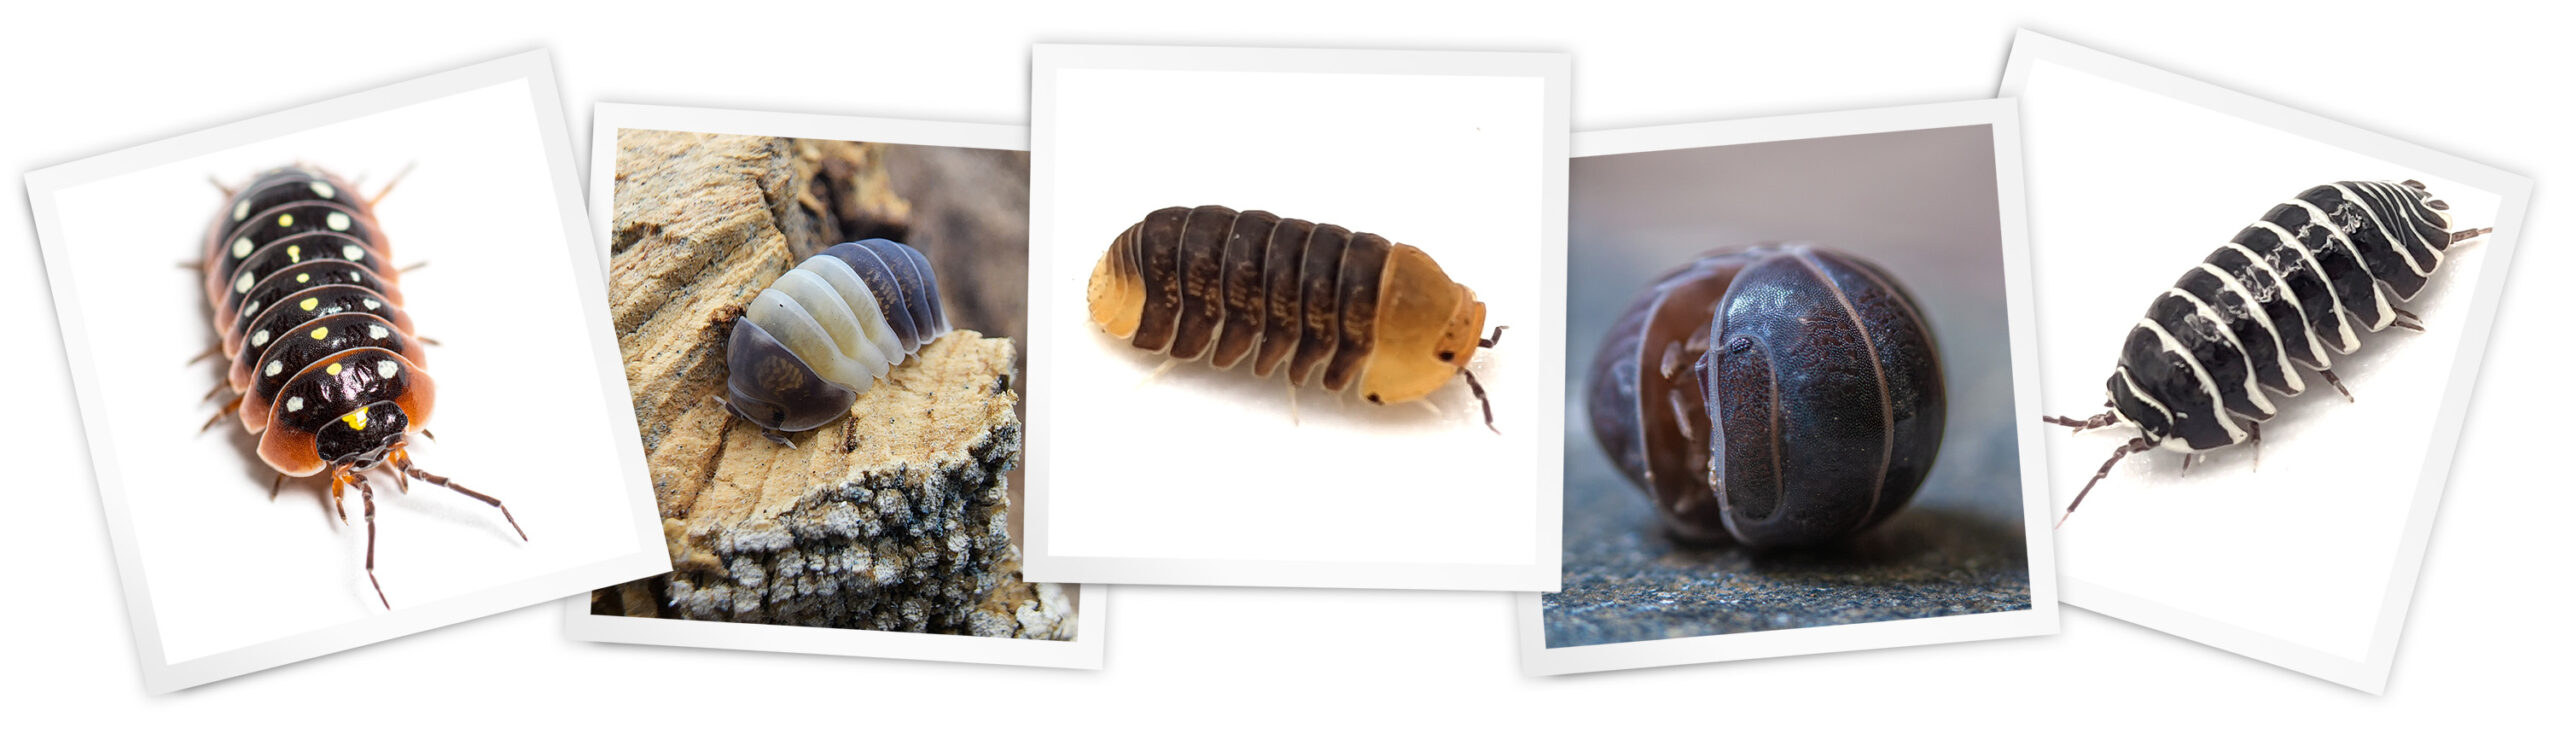 Isopods page header